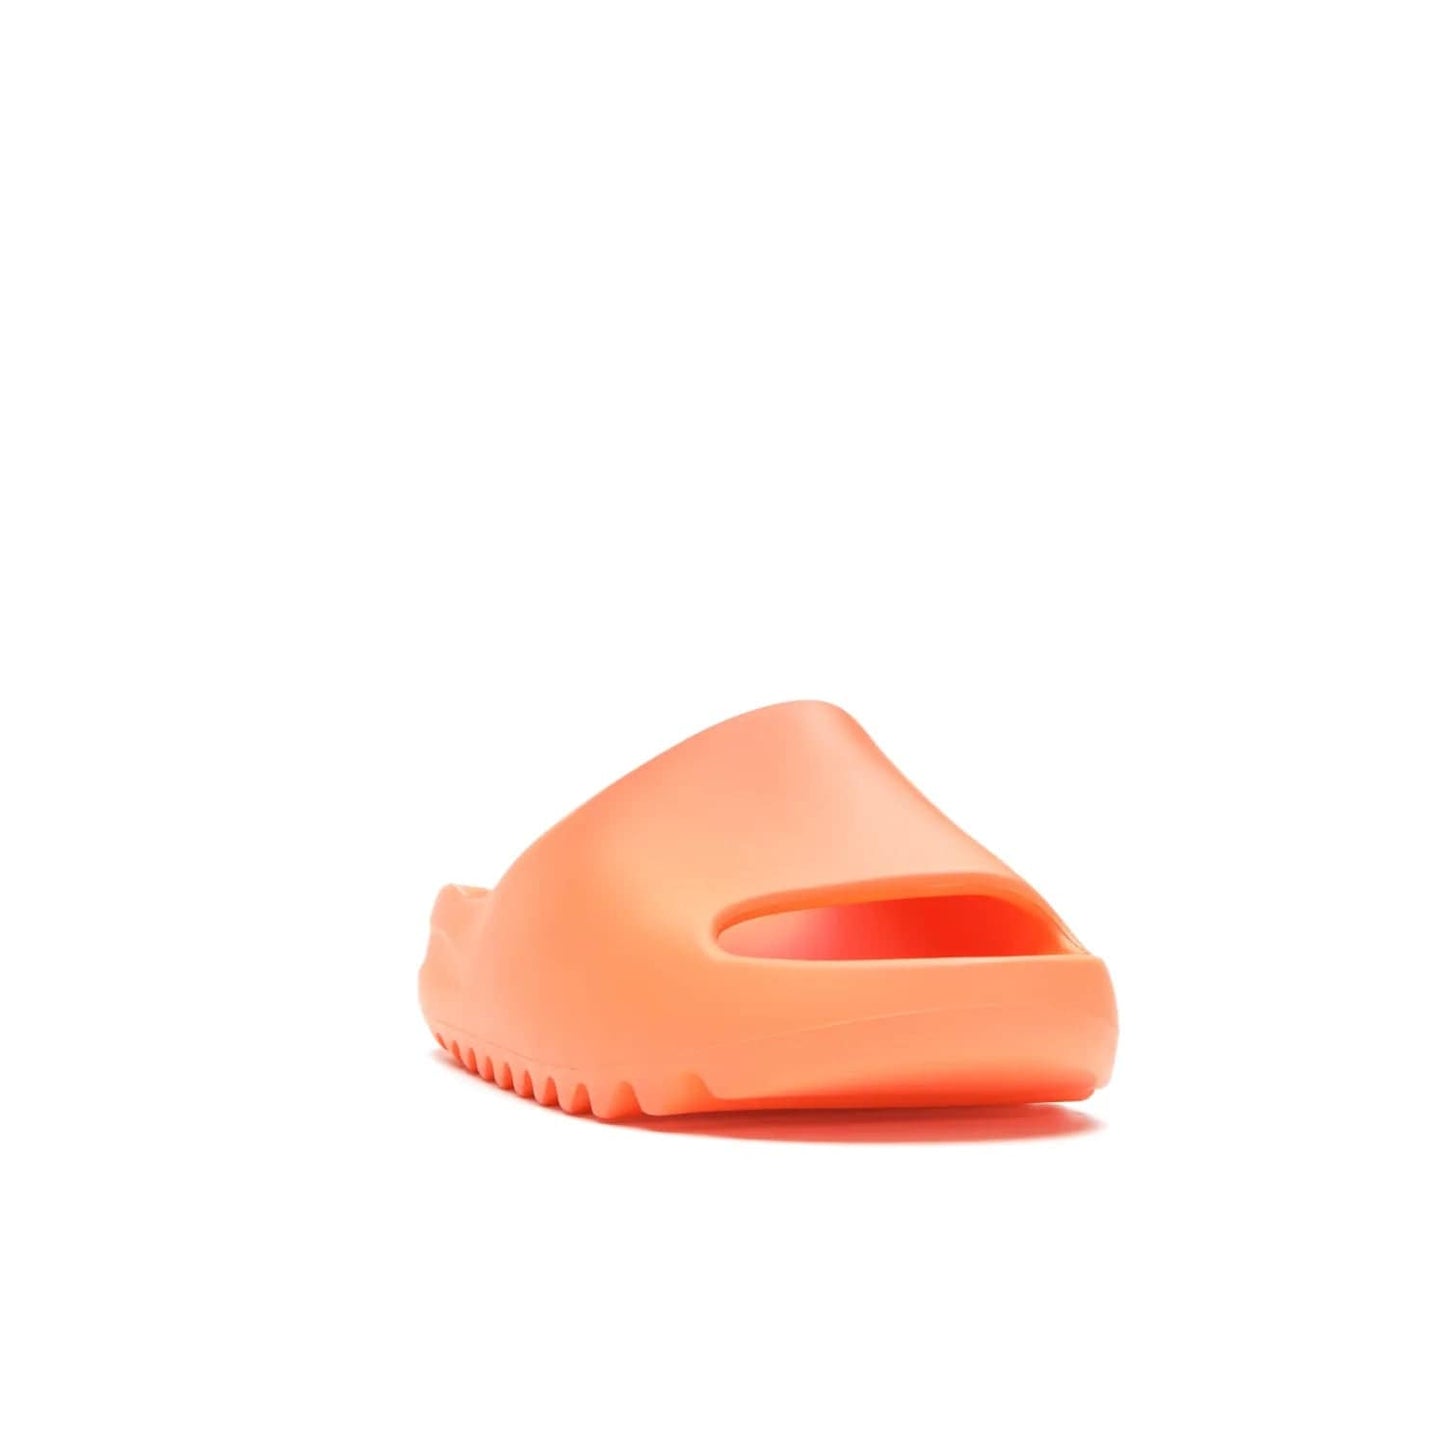 adidas Yeezy Slide Enflame Orange - Image 8 - Only at www.BallersClubKickz.com - Limited edition adidas Yeezy Slide featuring a bold Enflame Orange upper and EVA foam construction. Grooved outsole for traction and support. Released June 2021. Perfect for summer.